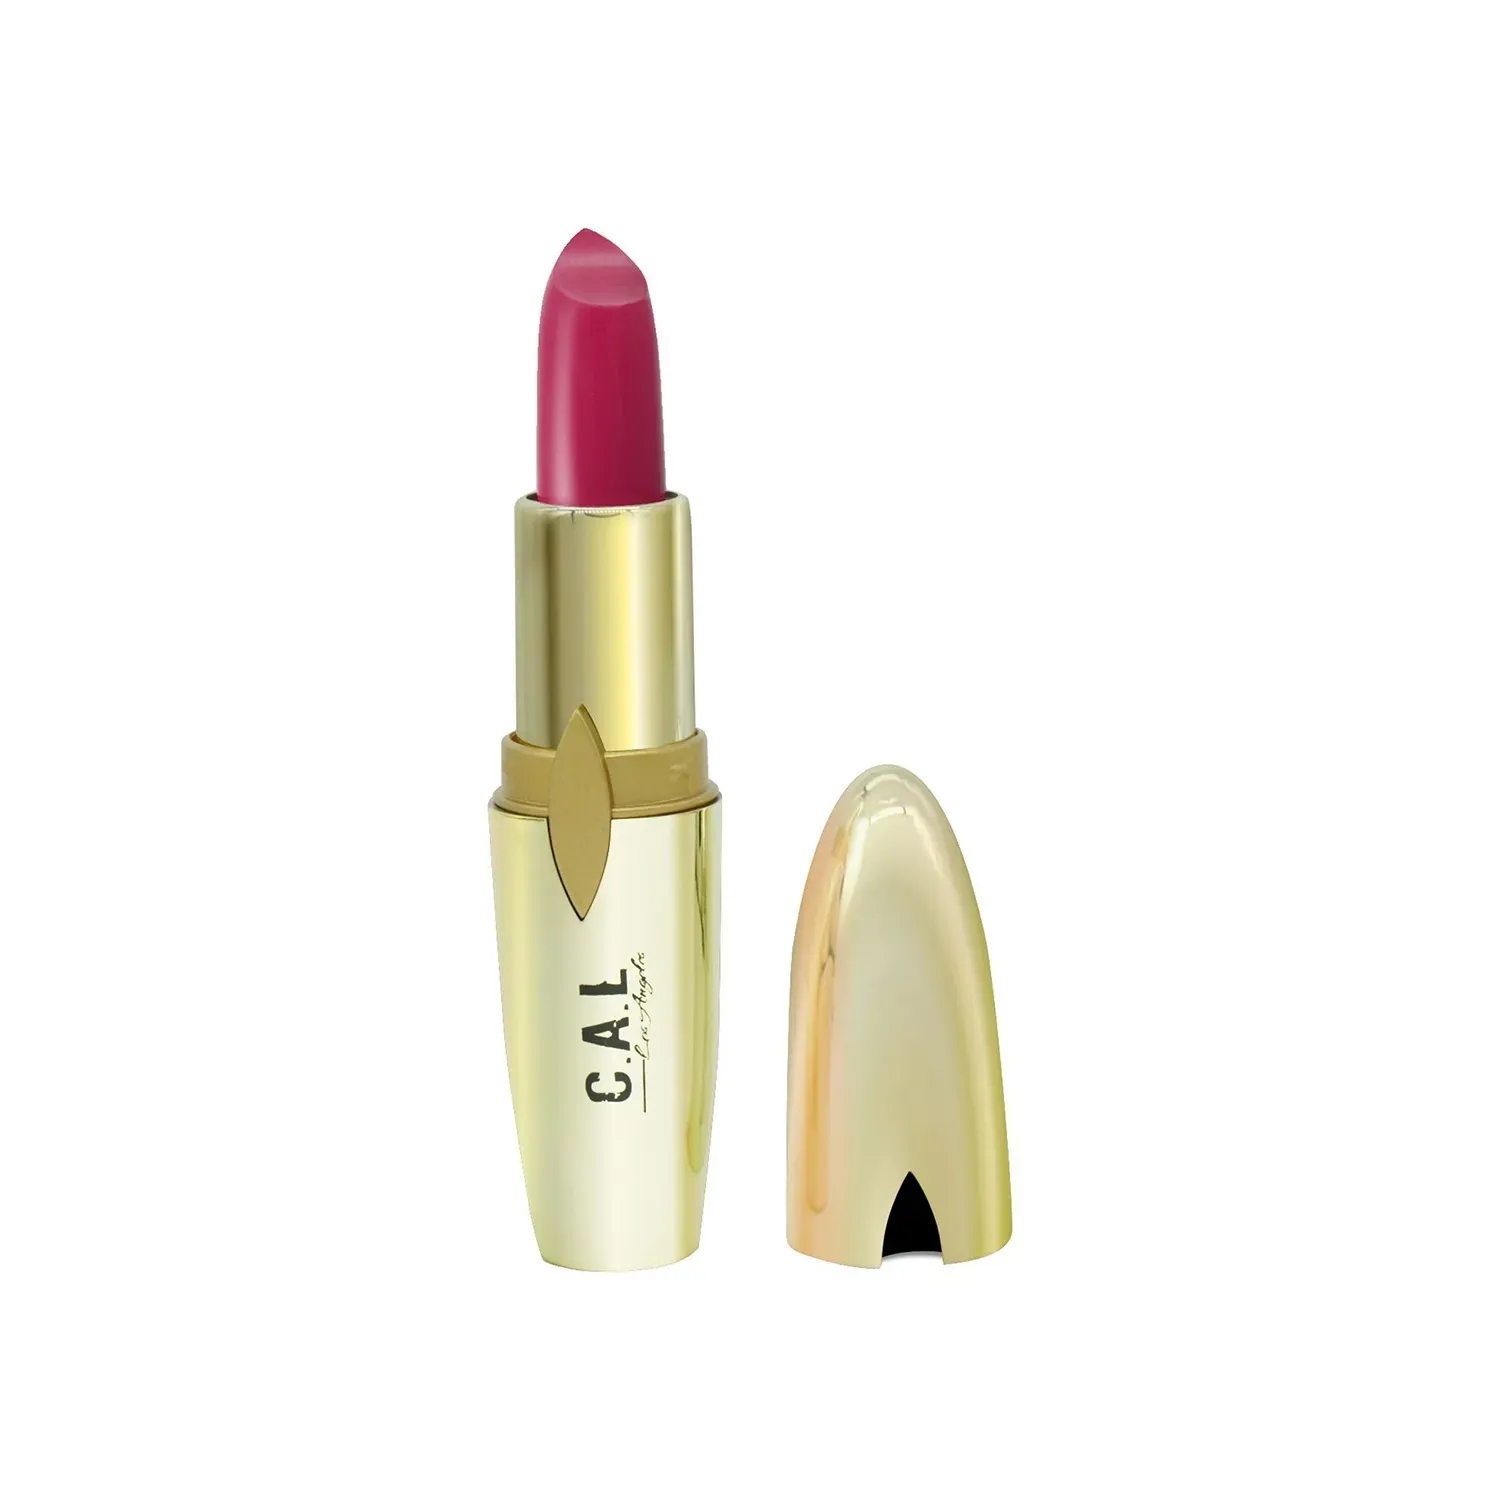 C.A.L Los Angeles | C.A.L Los Angeles Frosted Rose Perfect Pout Lipstick - Frosted Rose (15g)